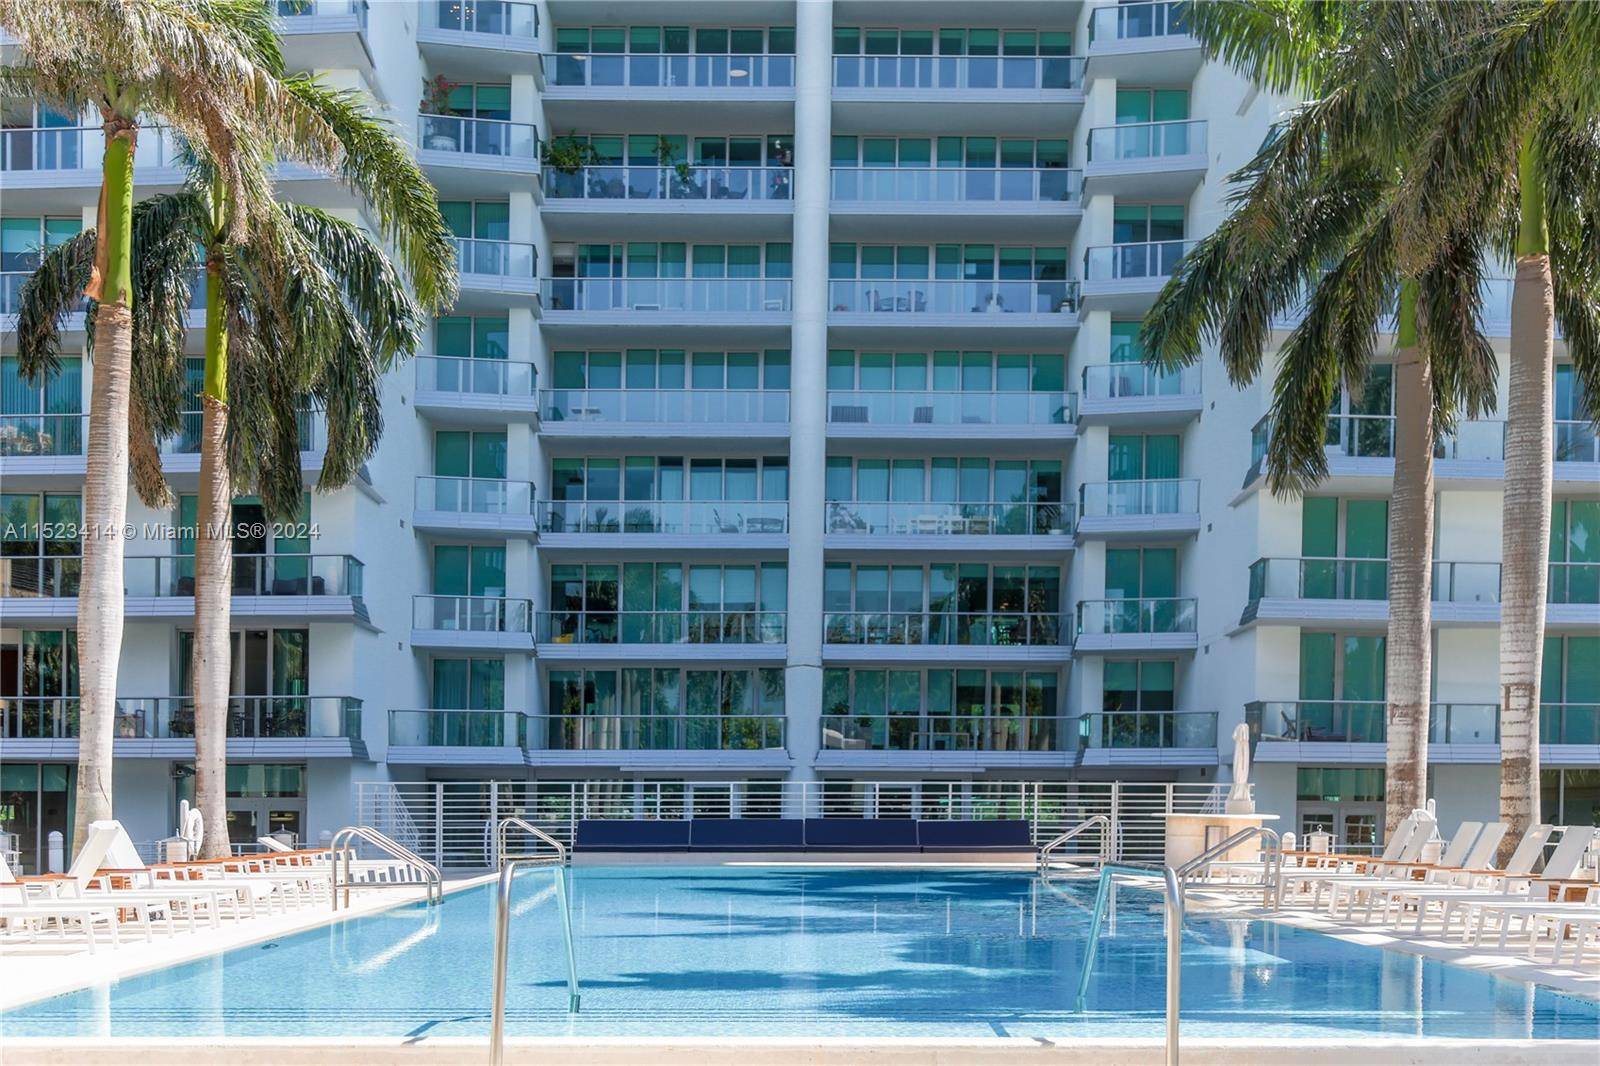 Luxurious two bedroom split floor plan with amazing, unobstructed bay and ocean views from every room.